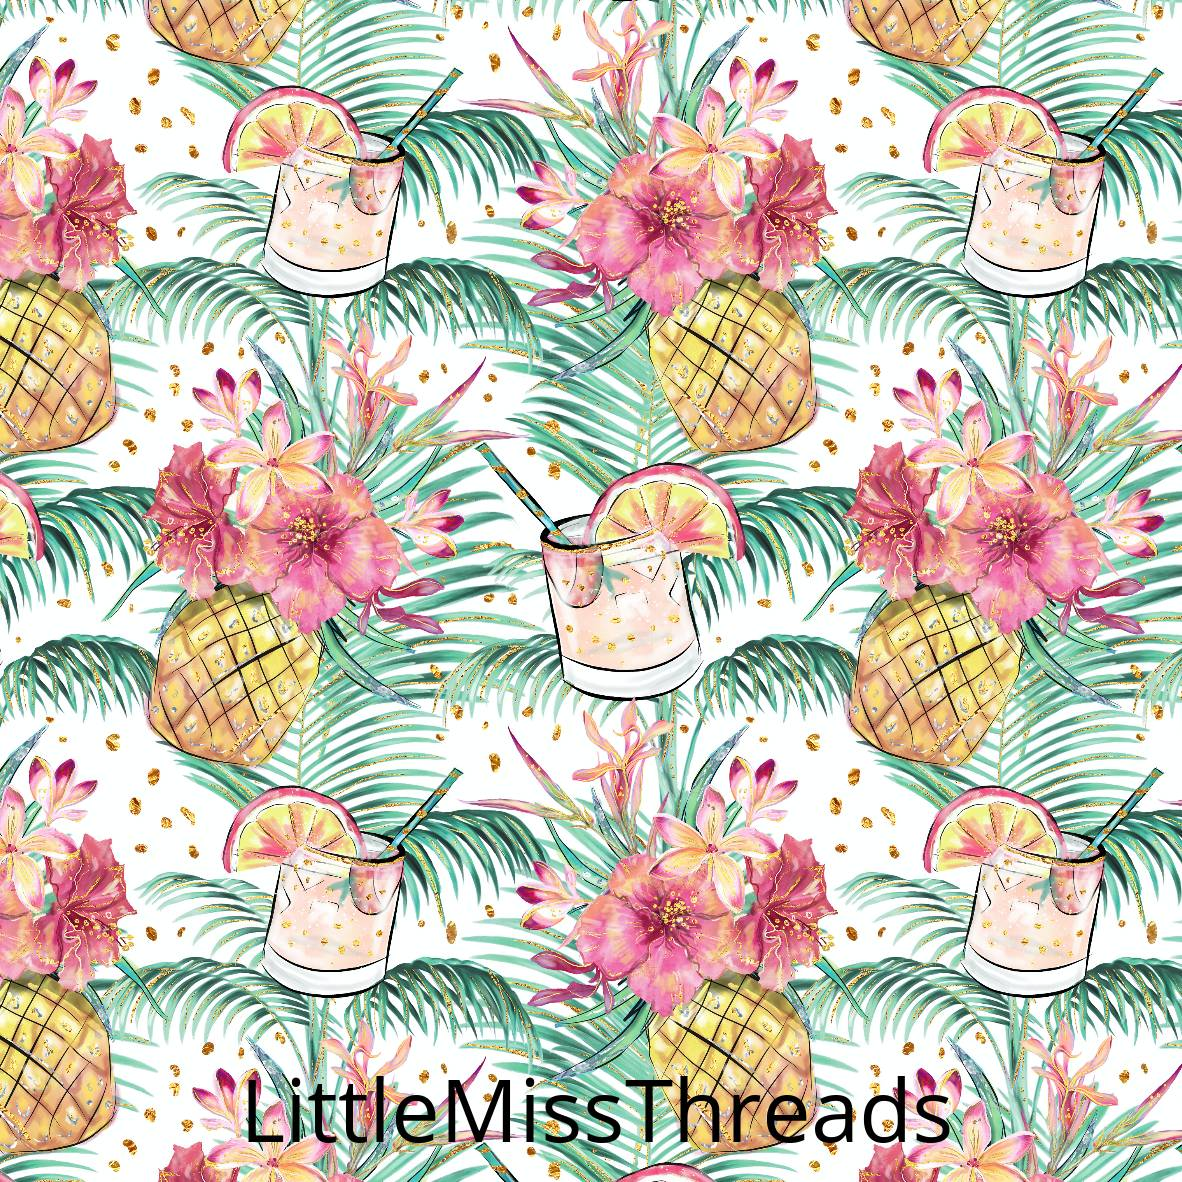 PRE ORDER - Lush Tropics Drinks White - Fabric - Fabric from [store] by Little Miss Threads - 